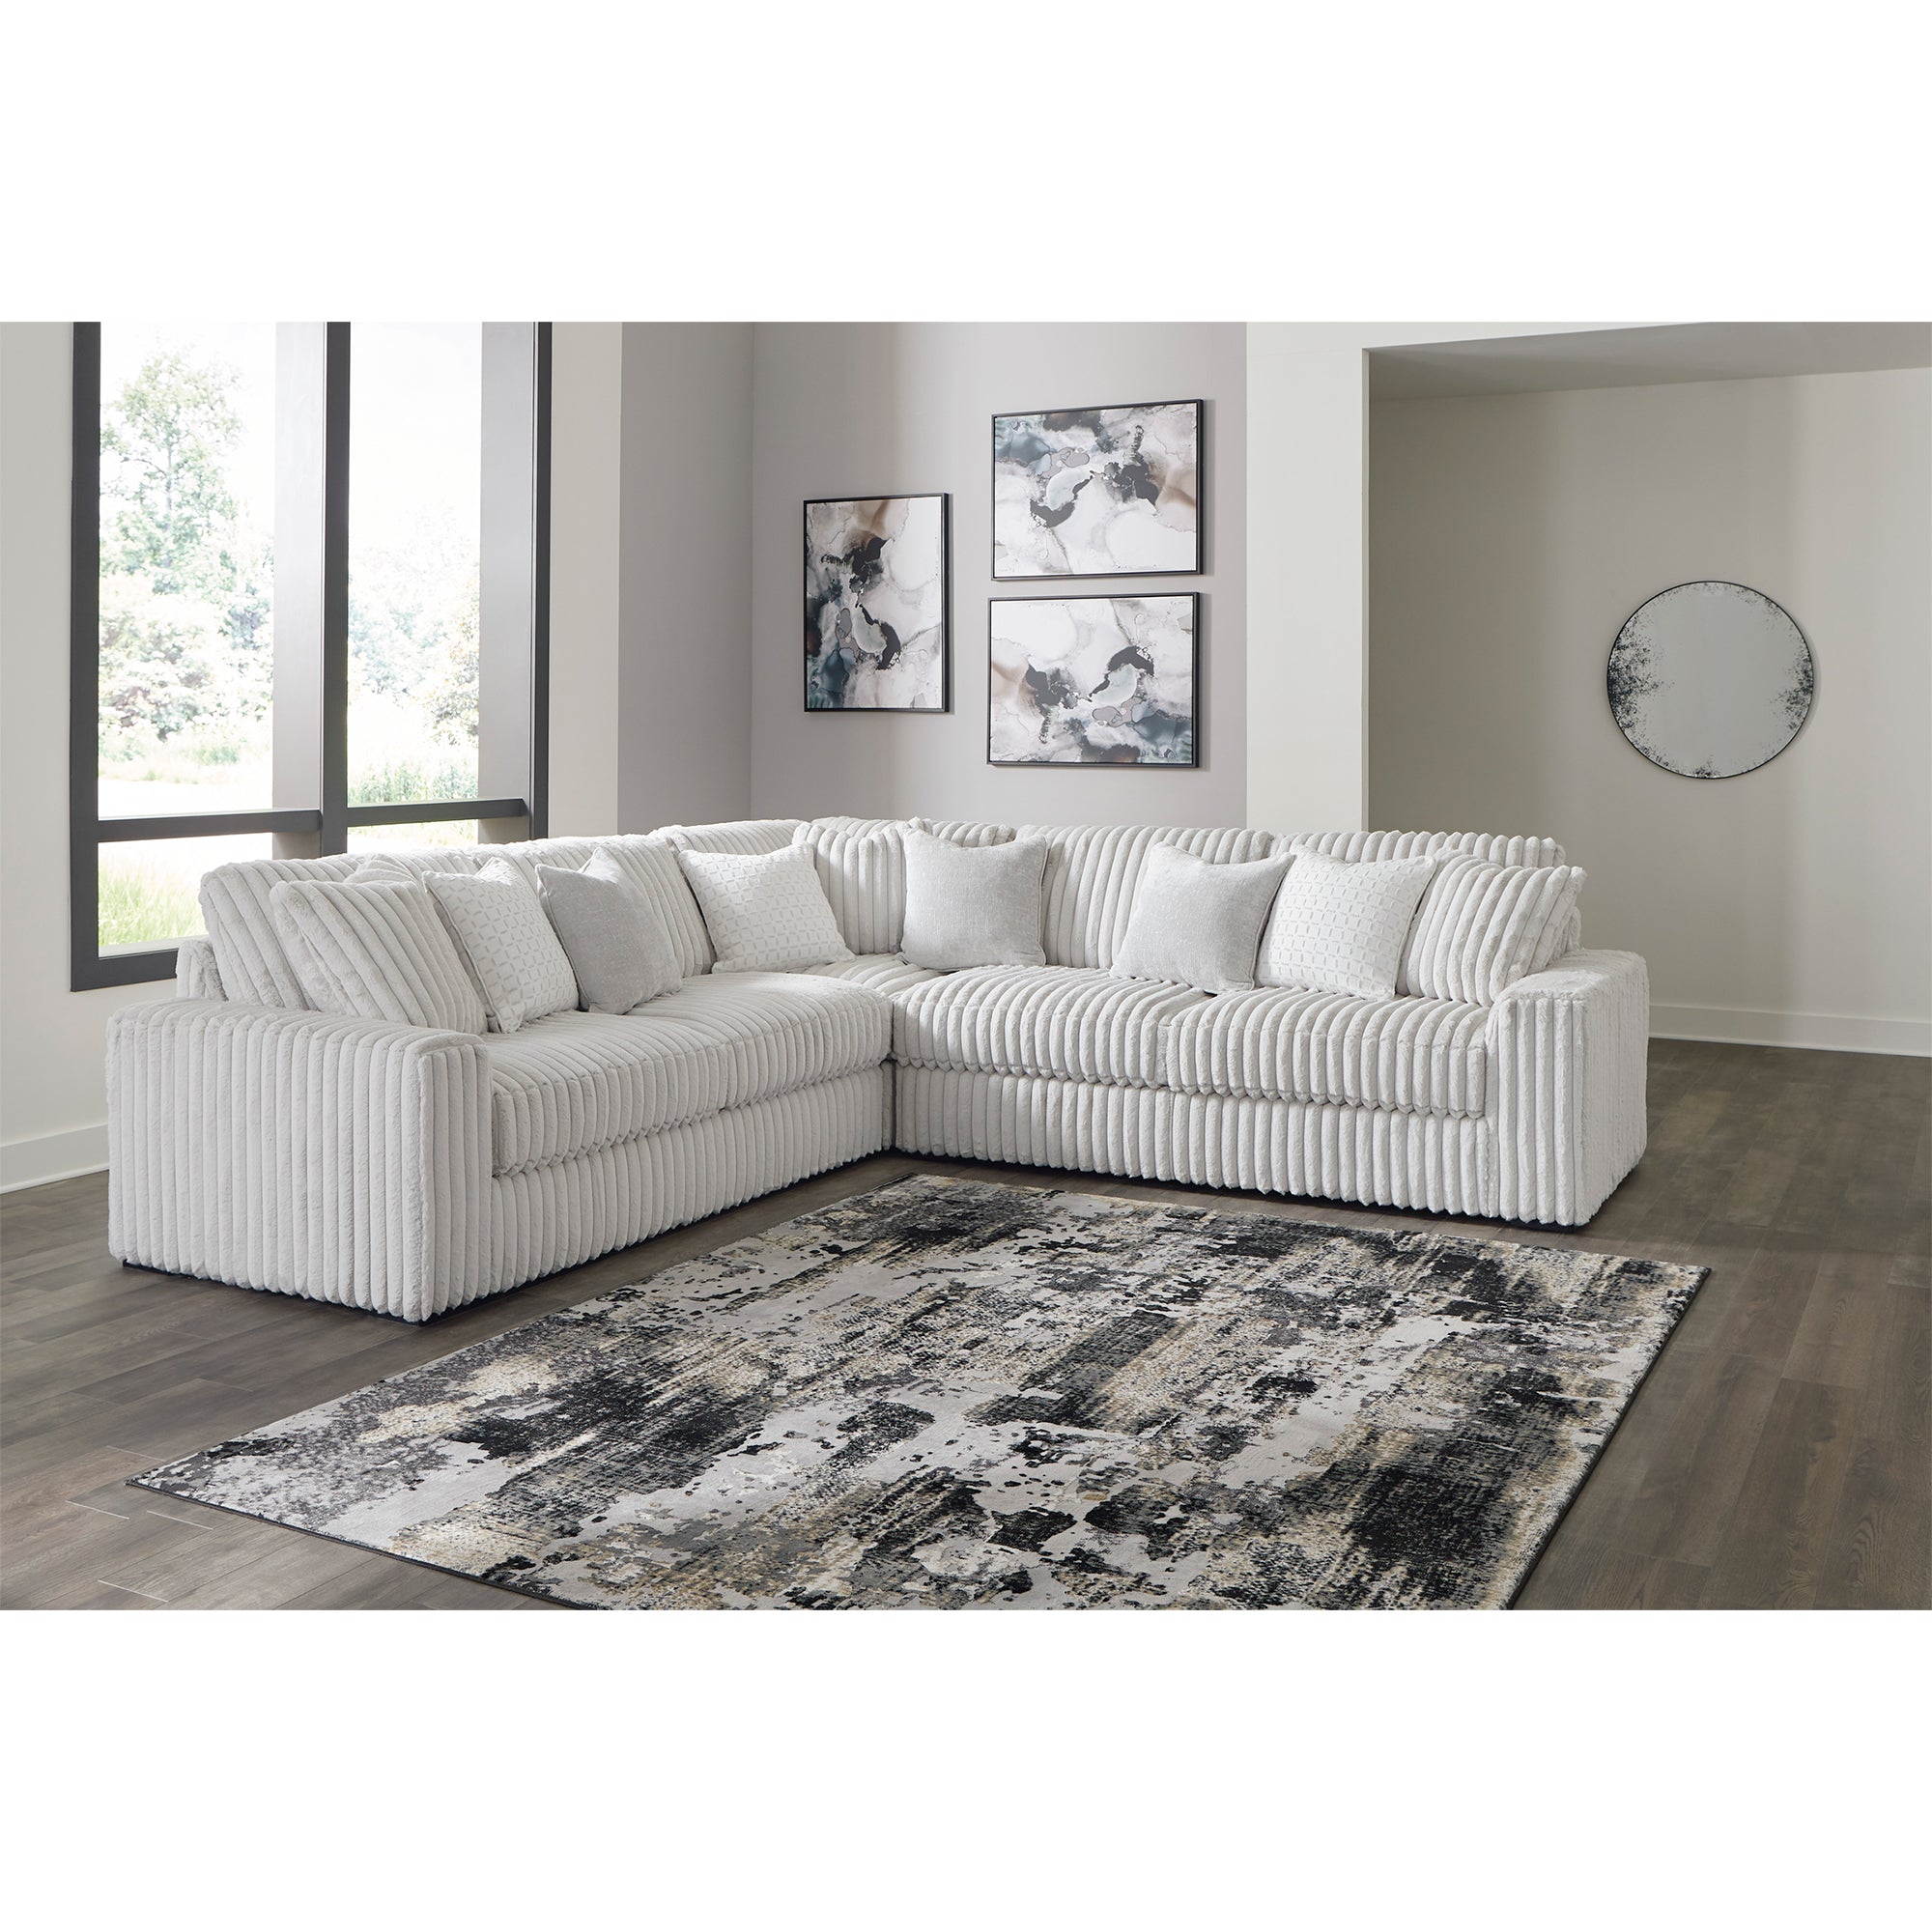 Stupendous 3-Piece Sectional with platform foundation for superior durability and support, maintains a sleek, wrinkle-free appearance